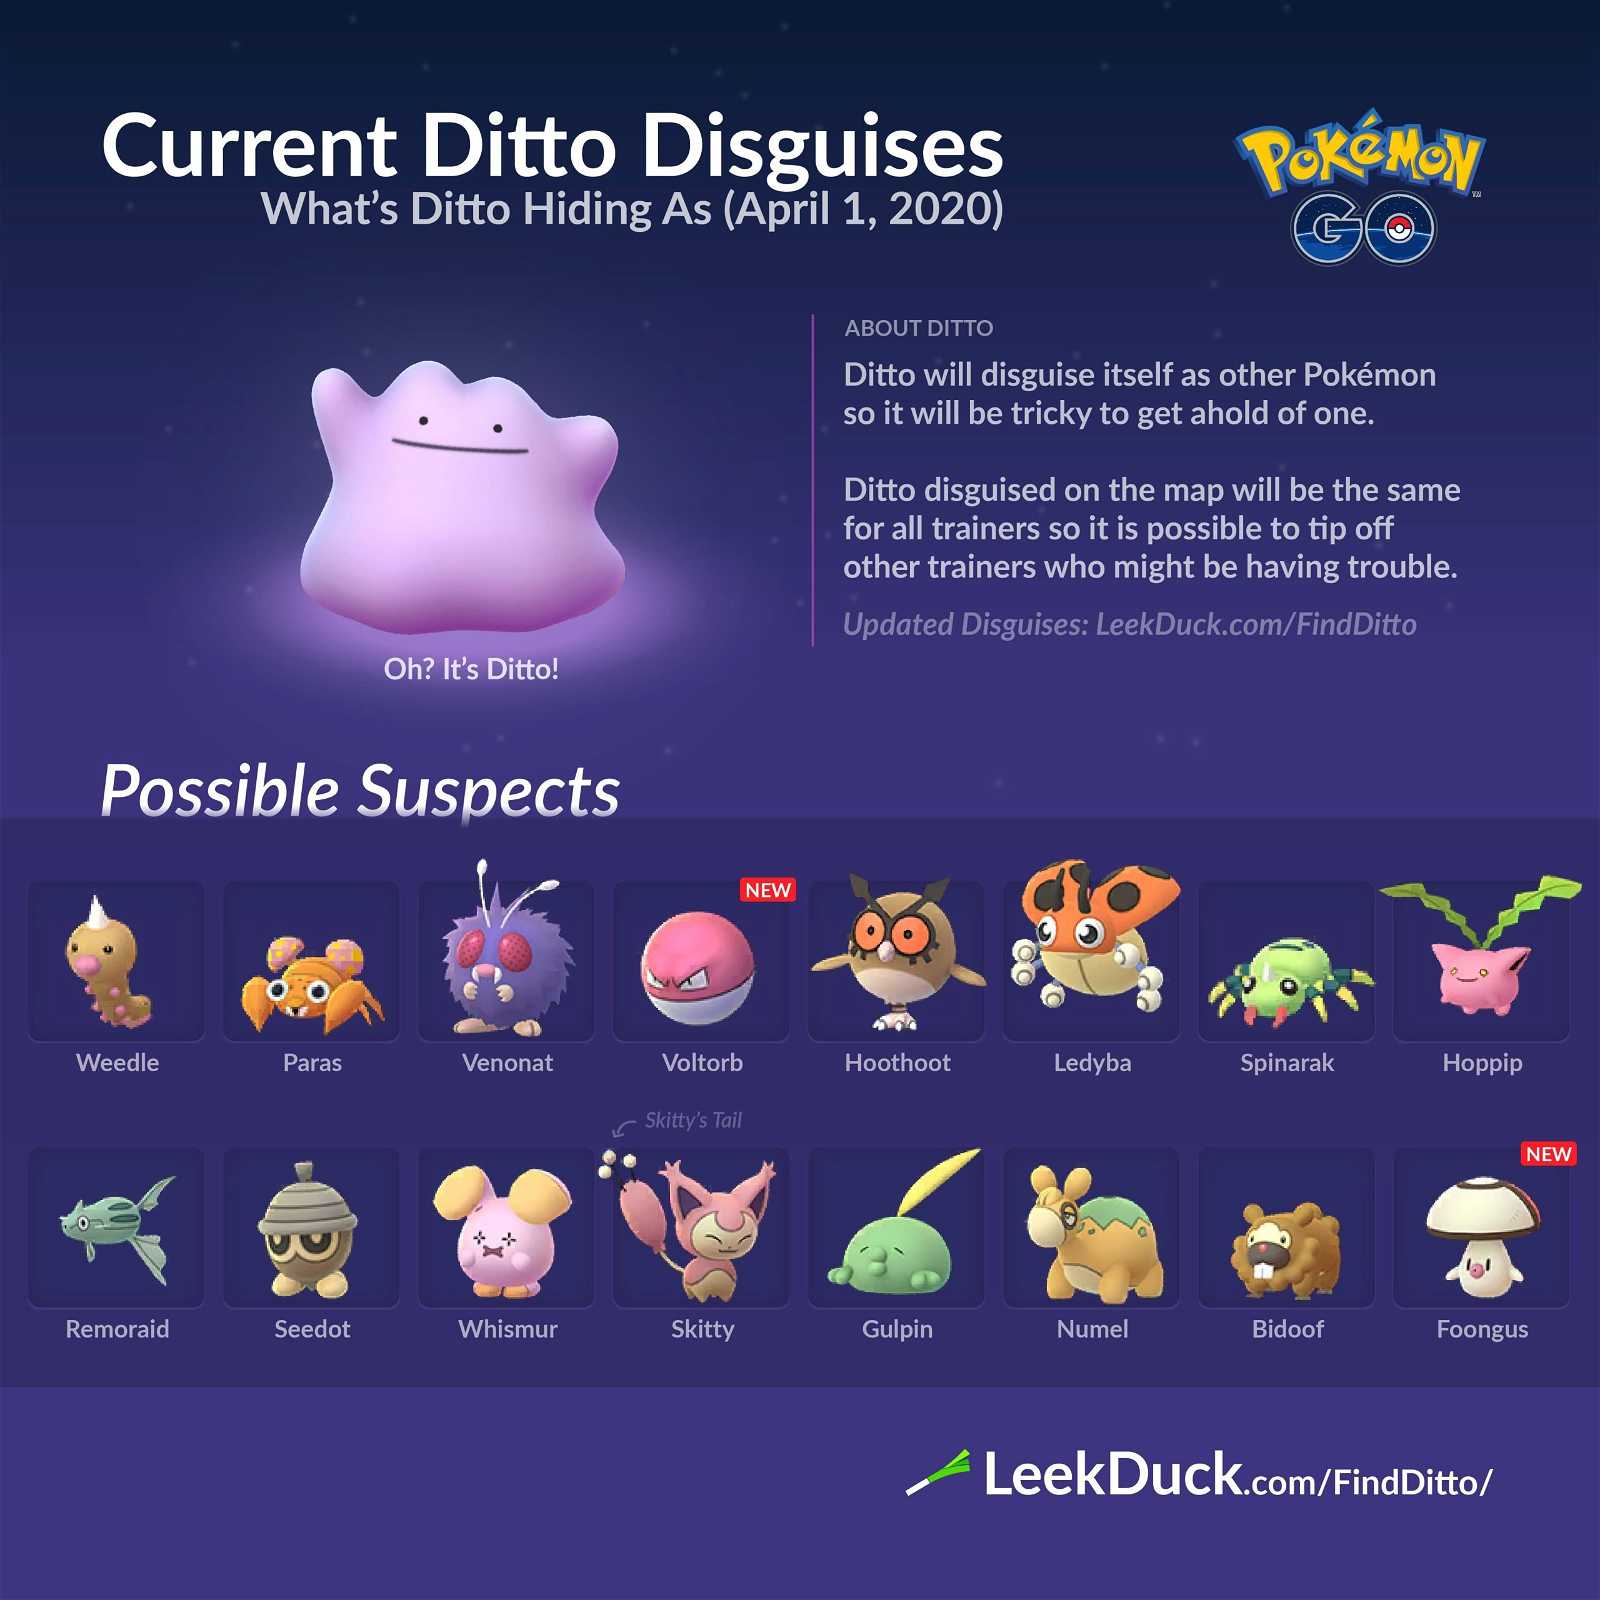 Current Ditto Disguises